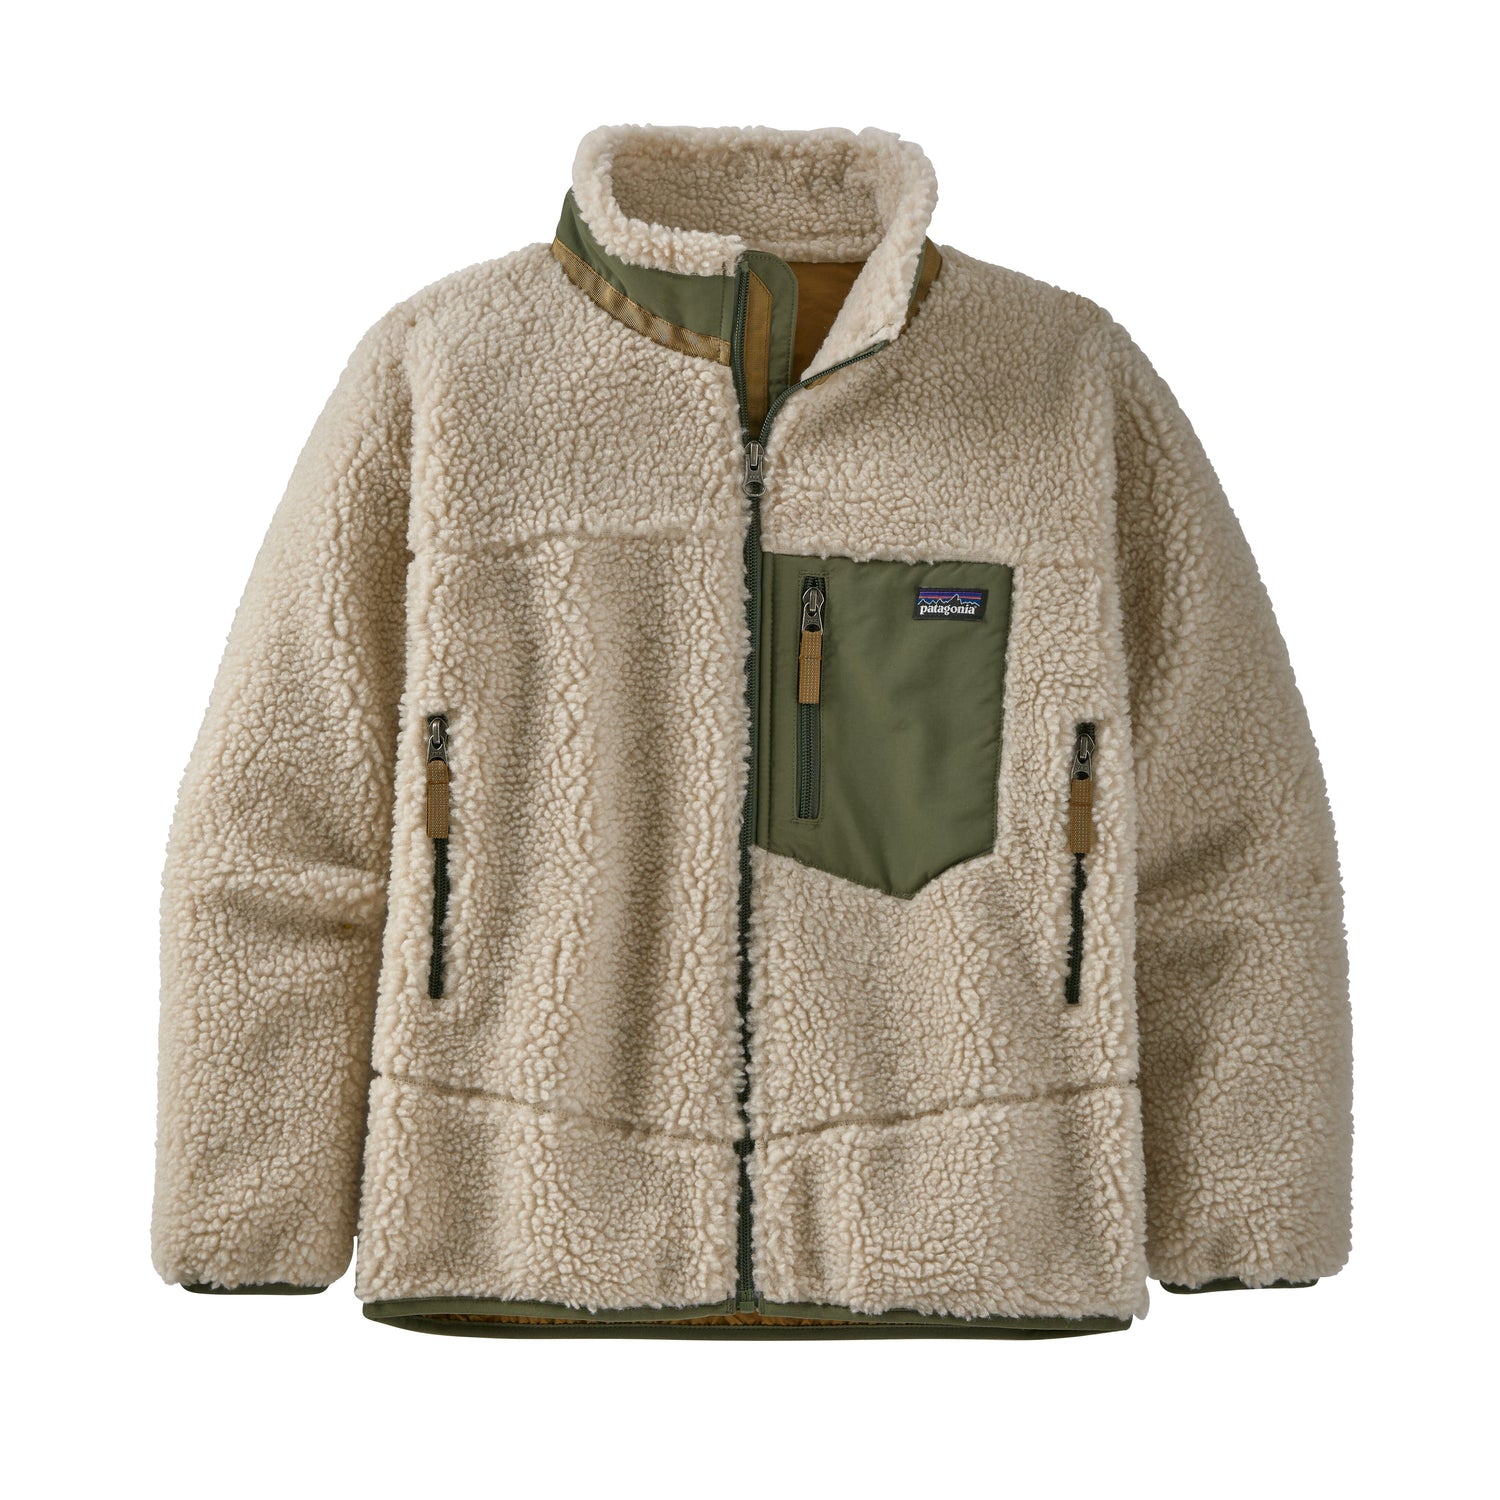 Patagonia K's Retro-X Jacket - Recycled Polyester Natural w/Coriander Brown Jacket